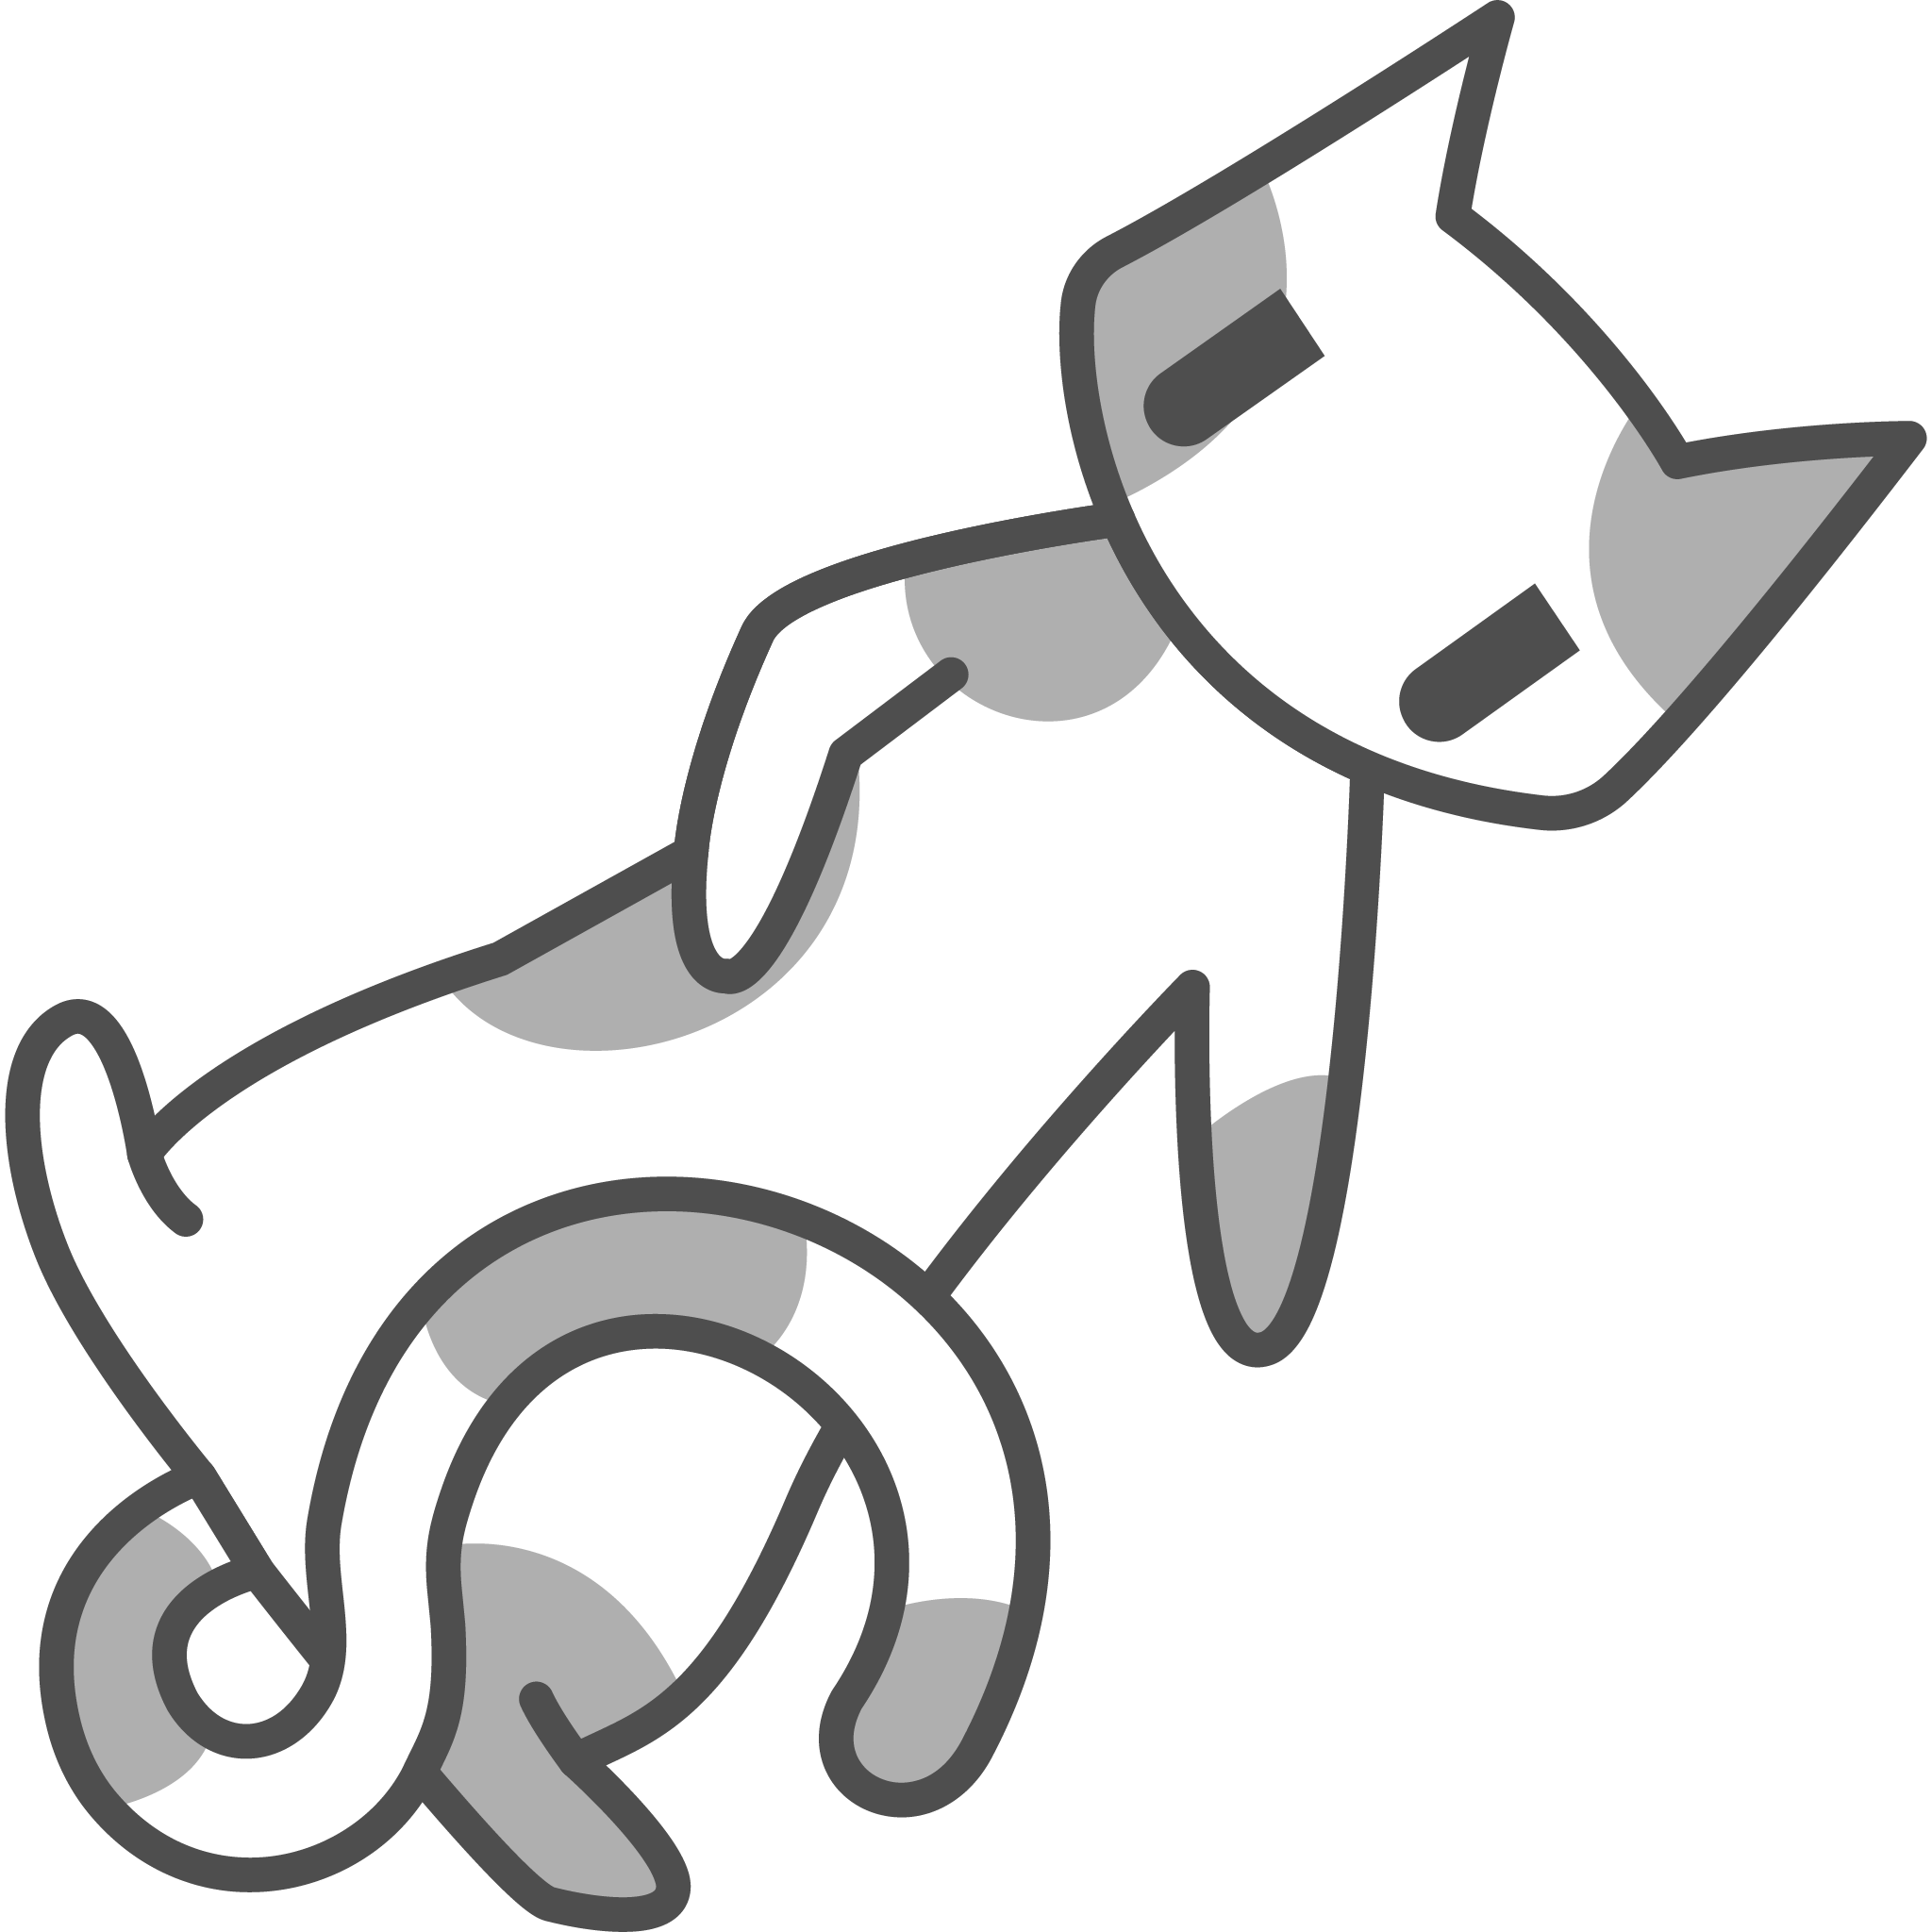 A greyed out version of our mascot, Logan, who is a cat.